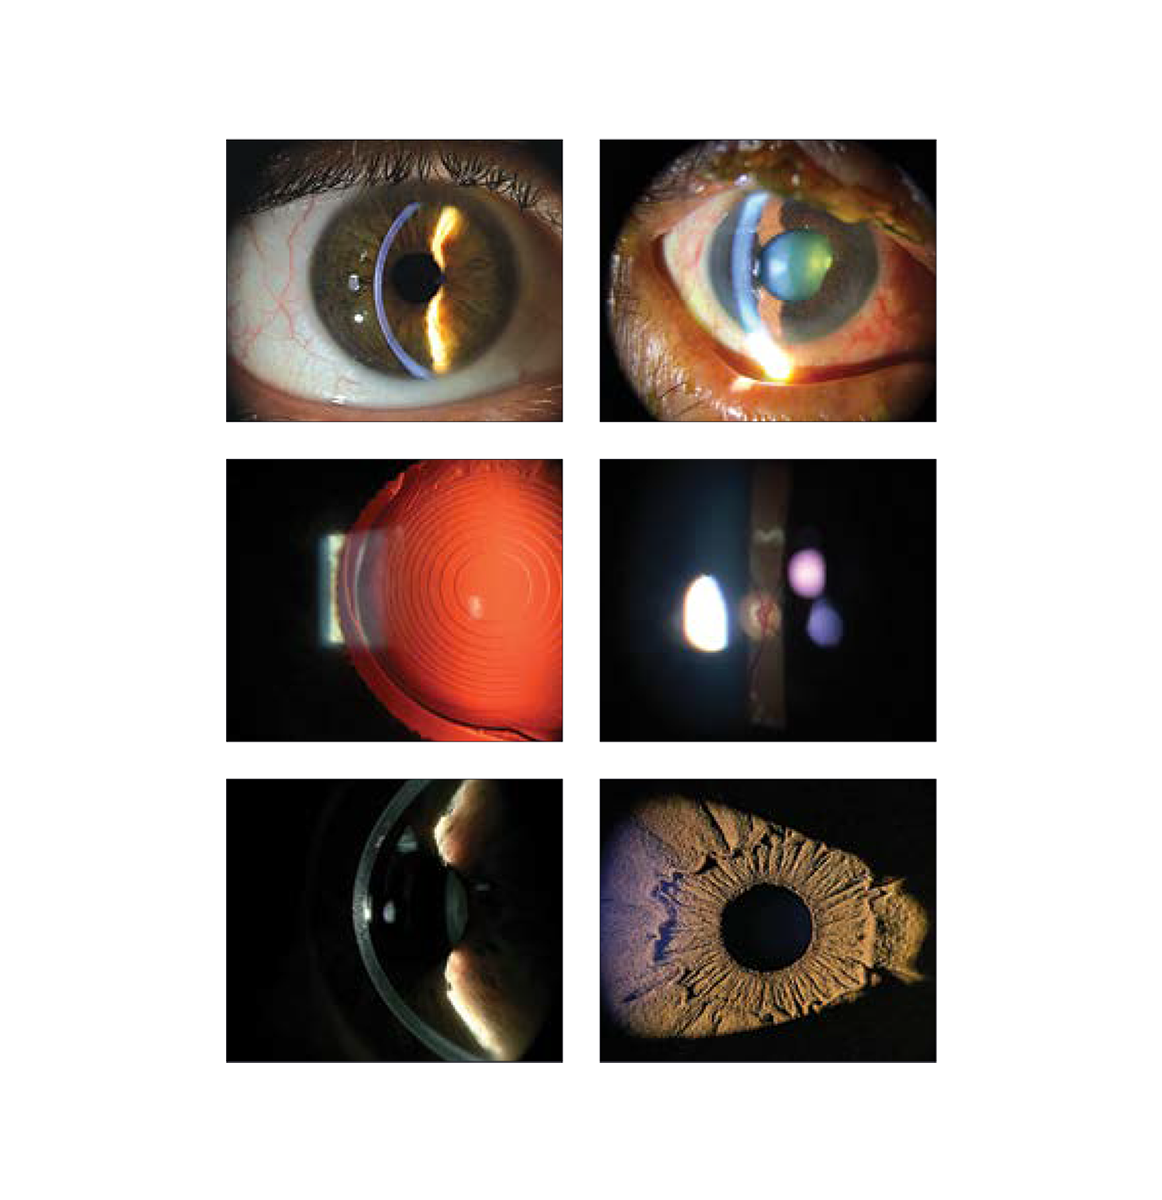 Ultra-Clear Anterior & Posterior Observations